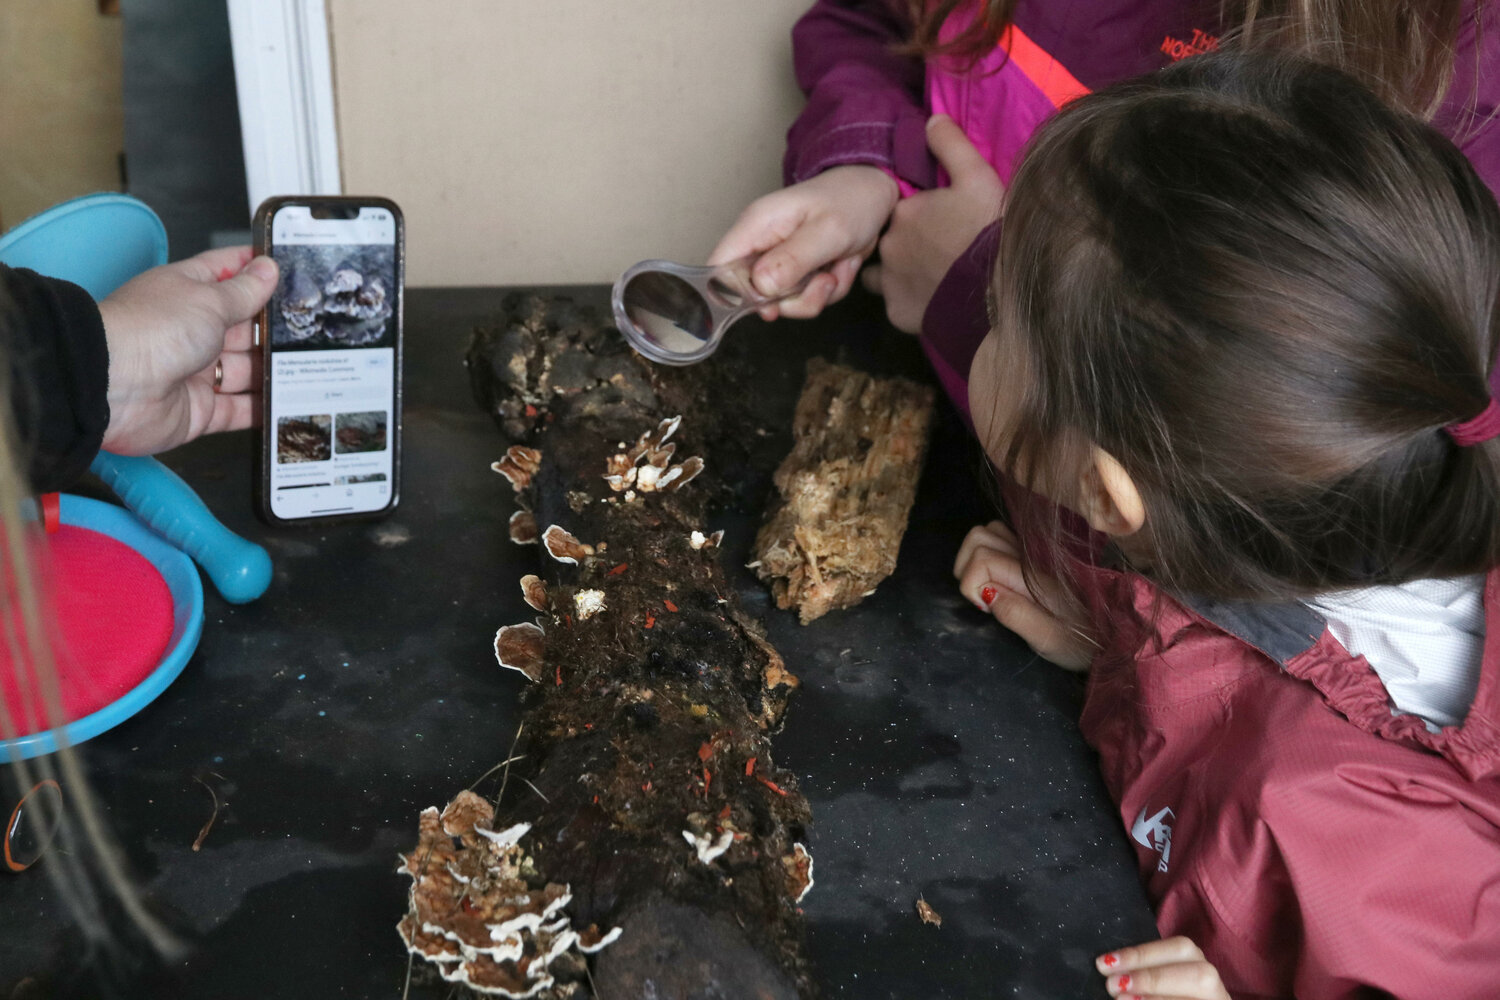 Sweet Tomatoes Learning Center students examine mushrooms growing out of a log in Chehalis on Wednesday, Dec. 6.